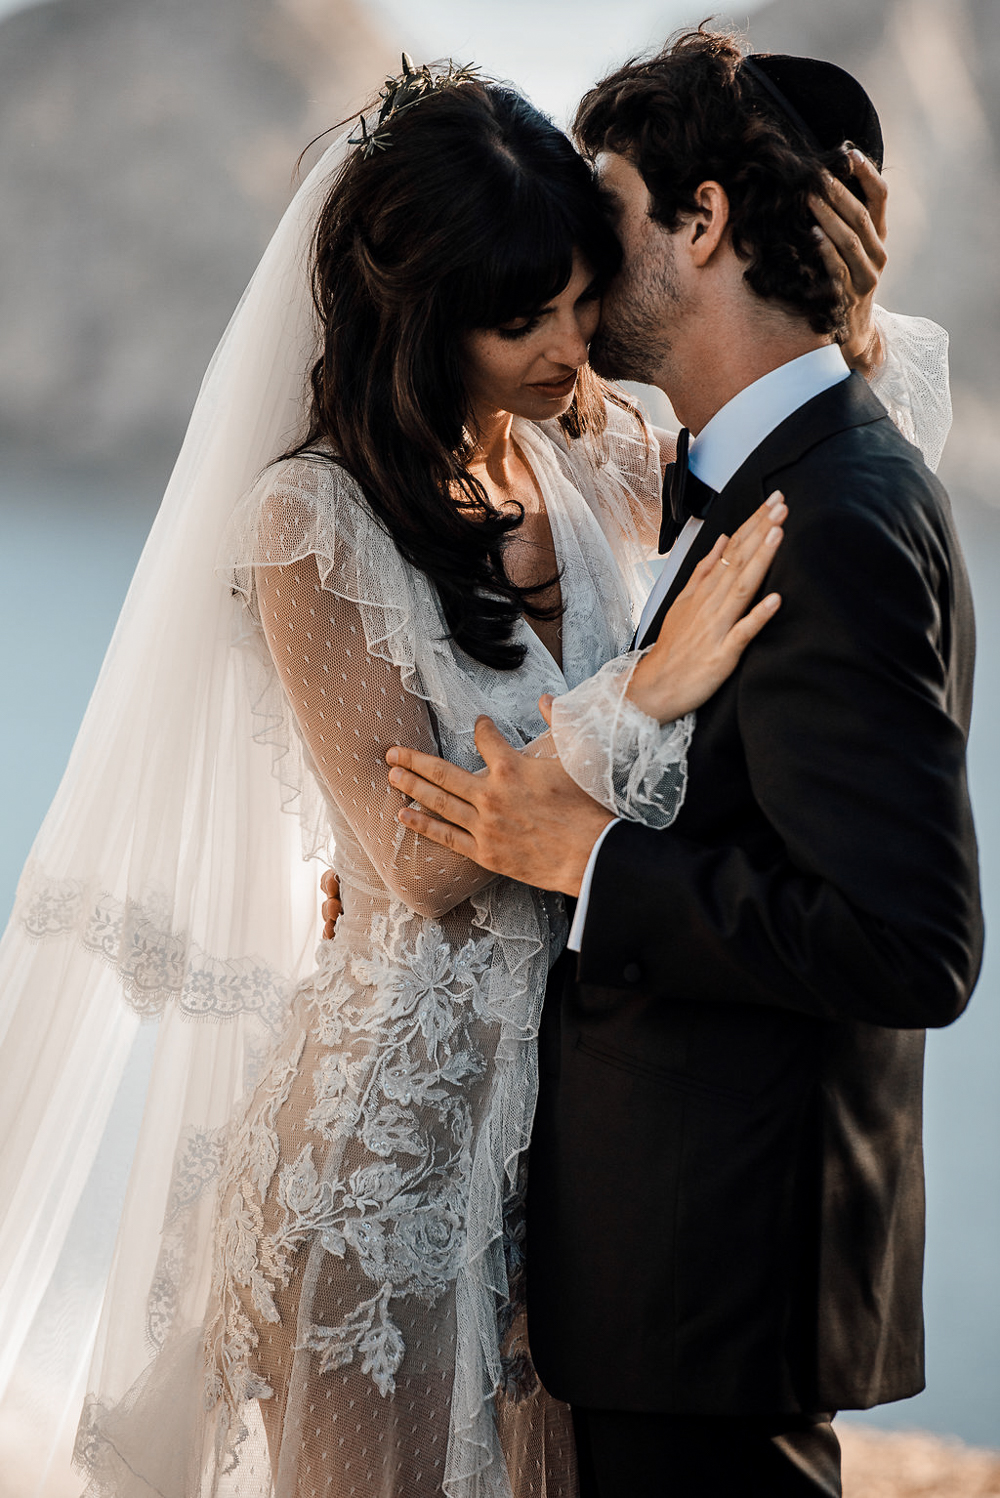 One of our highlights last year was definetely the wedding from Gabrielle and Davide in Ibiza! It was a real pleasure and pure inspiration for us to photograph them! With their keen sense of style and effortless taste they created -together with the very talented Lisa from Isla & Smith- a glammy midsummerdream. Gaby chose a customed gown from the Israeli Designer Inbal Dror. She combined it with shoes from YSL. With her hair open done by the faboulous Diva Borelli and a simple bunch of olives she embodied the effortless parisian/ isreali chic and she looked incredibly gorgeous! The jewish ceremony was held at the magical place in front of Es Vedra. It was a filmlike scenery, the beauty, the spirit, the magic we felt. Afterwards the 240 guests went to the private villa of the brides father where they enjoyed the ibiza sunset from the boho inspired terraces. The di nner was held under the sky, long tables through orange trees, decorated with tons of fairy lights, thanks to the magic hands of Lisa! Gaby and Davide partied all night long with their guests in the best way one could ask for!l Thanks so much Gaby and Davide for this experience! We wish you all the best! Lots of Love, Tali & Claudia IBIZA DREAM WEDDING ES VEDRAIBIZA DREAM WEDDING ES VEDRA D&G-107-2 Glam Wedding Ibiza Es VedraIBIZA DREAMWEDDING ES VEDRA IBIZA DREAM WEDDING ES VEDRAGlam Wedding Ibiza Es VedraGlam Wedding Ibiza Es VedraD&G-289IBIZA DREAM WEDDING ES VEDRAGlam Wedding Ibiza Es VedraGlam Wedding Ibiza Es VedraD&G-388D&G-320D&G-363-2D&G-367-2D&G-666D&G-647D&G-568Ibiza Dream Wedding Es Vedra Ibiza Dream Wedding Es VedraGlam Wedding Ibiza Es VedraIbiza Dream Wedding Es Vedra D&G-638D&G-707Ibiza Dream Wedding Es VedraD&G-705D&G-714Ibiza Dream Wedding Es VedraDSC00143D&G-717D&G-754D&G-755Ibiza Glam Wedding Es VedraD&G-777D&G-760Ibiza Dream Wedding Es VedraD&G-817D&G-812D&G-965-3D&G-956D&G-951D&G-926D&G-927D&G-931D&G-943Ibiza Dream Wedding Es VedraD&G-940D&G-922D&G-970D&G-971D&G-965Gabrielle & Davide's dream wedding in Es Vedra Ibiza Ibiza Dream Wedding Es VedraIbiza Dream Wedding Es VedraIbiza Dream Wedding Es VedraD&G-1015D&G-1080D&G-1006Ibiza Glam Wedding Es VedraD&G-1054D&G-1052D&G-992D&G-991-1D&G-985D&G-964Ibiza Glam Wedding Es Vedra